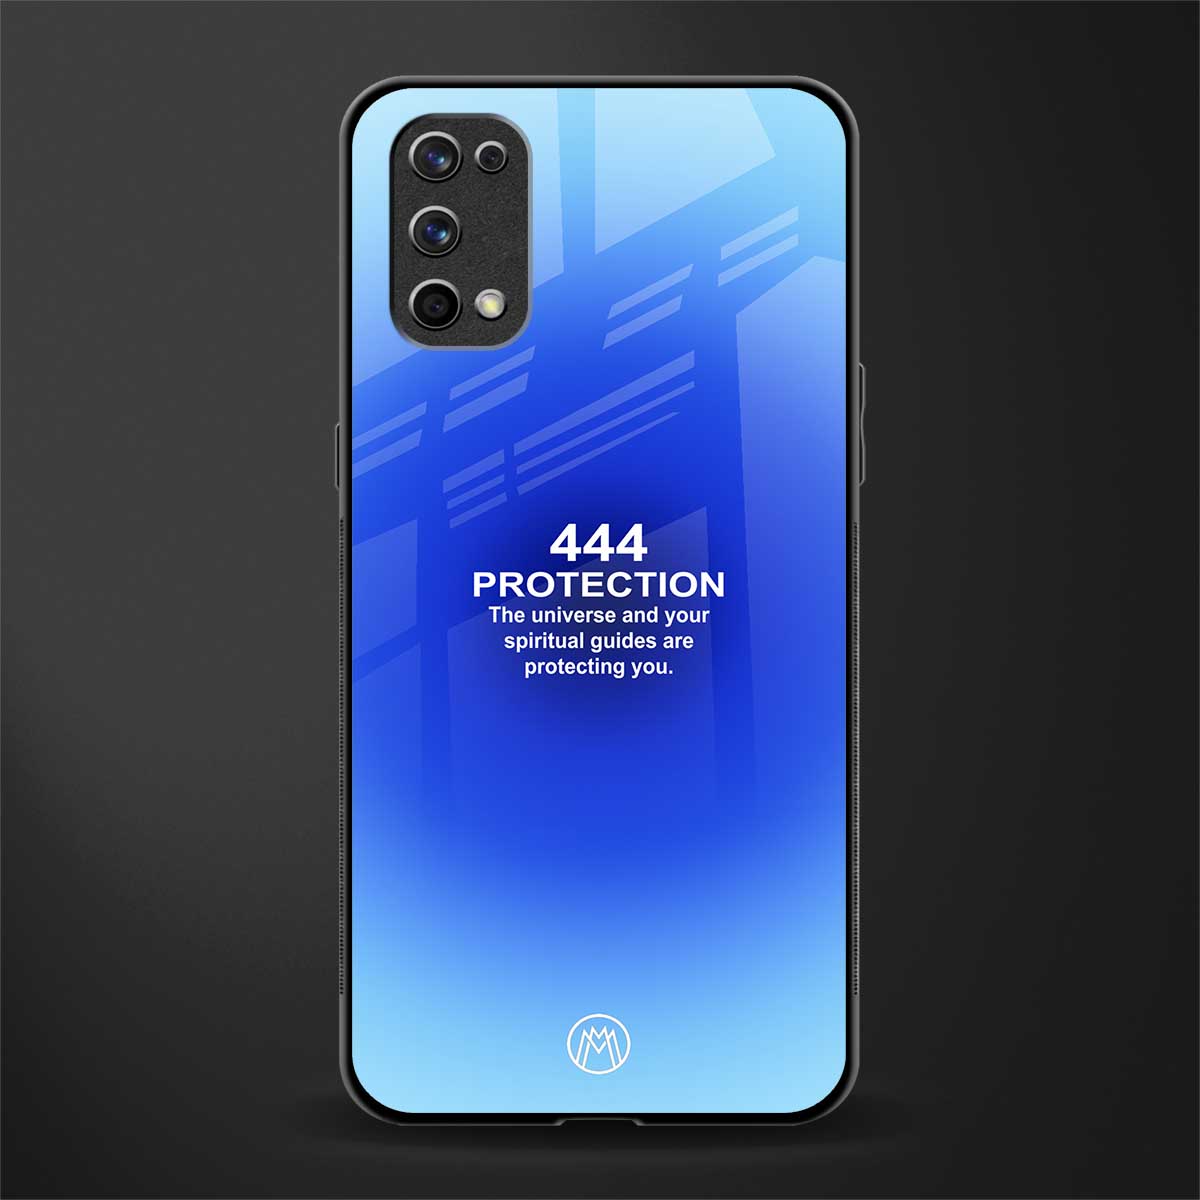 444 protection glass case for realme 7 pro image